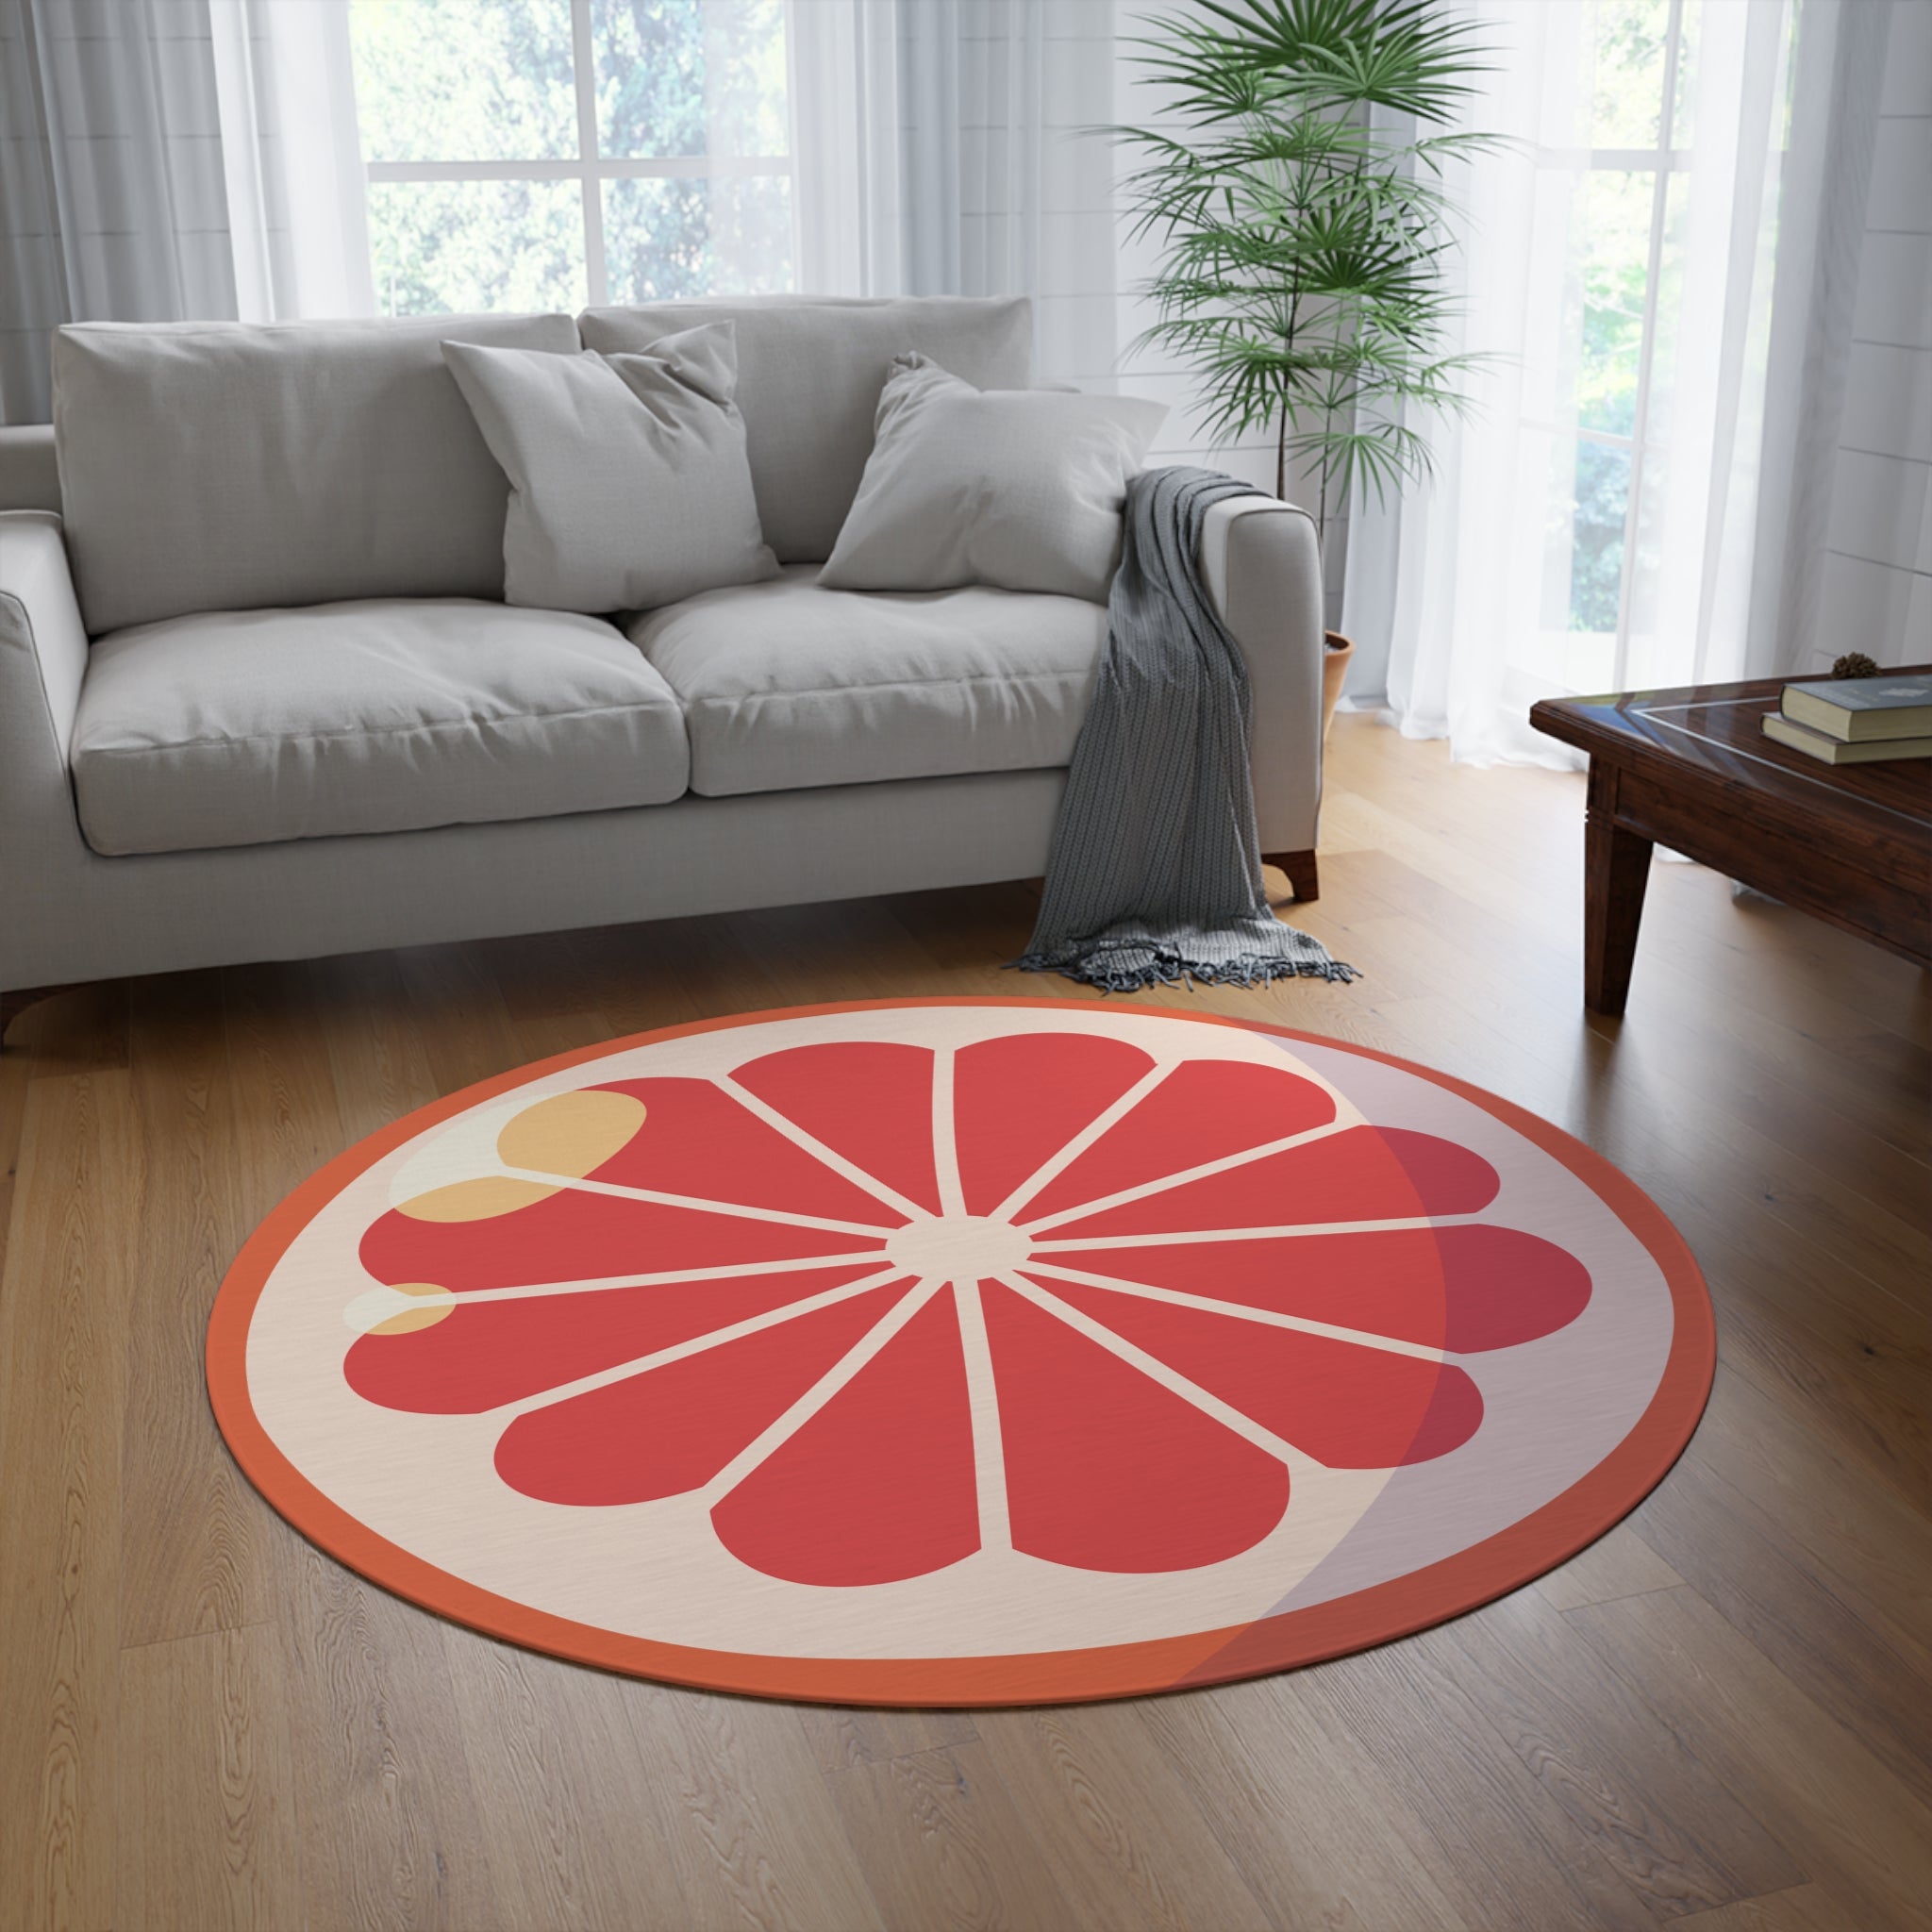 Elevate Your Space with a Stylish Round Rug in Grapefruit Shade